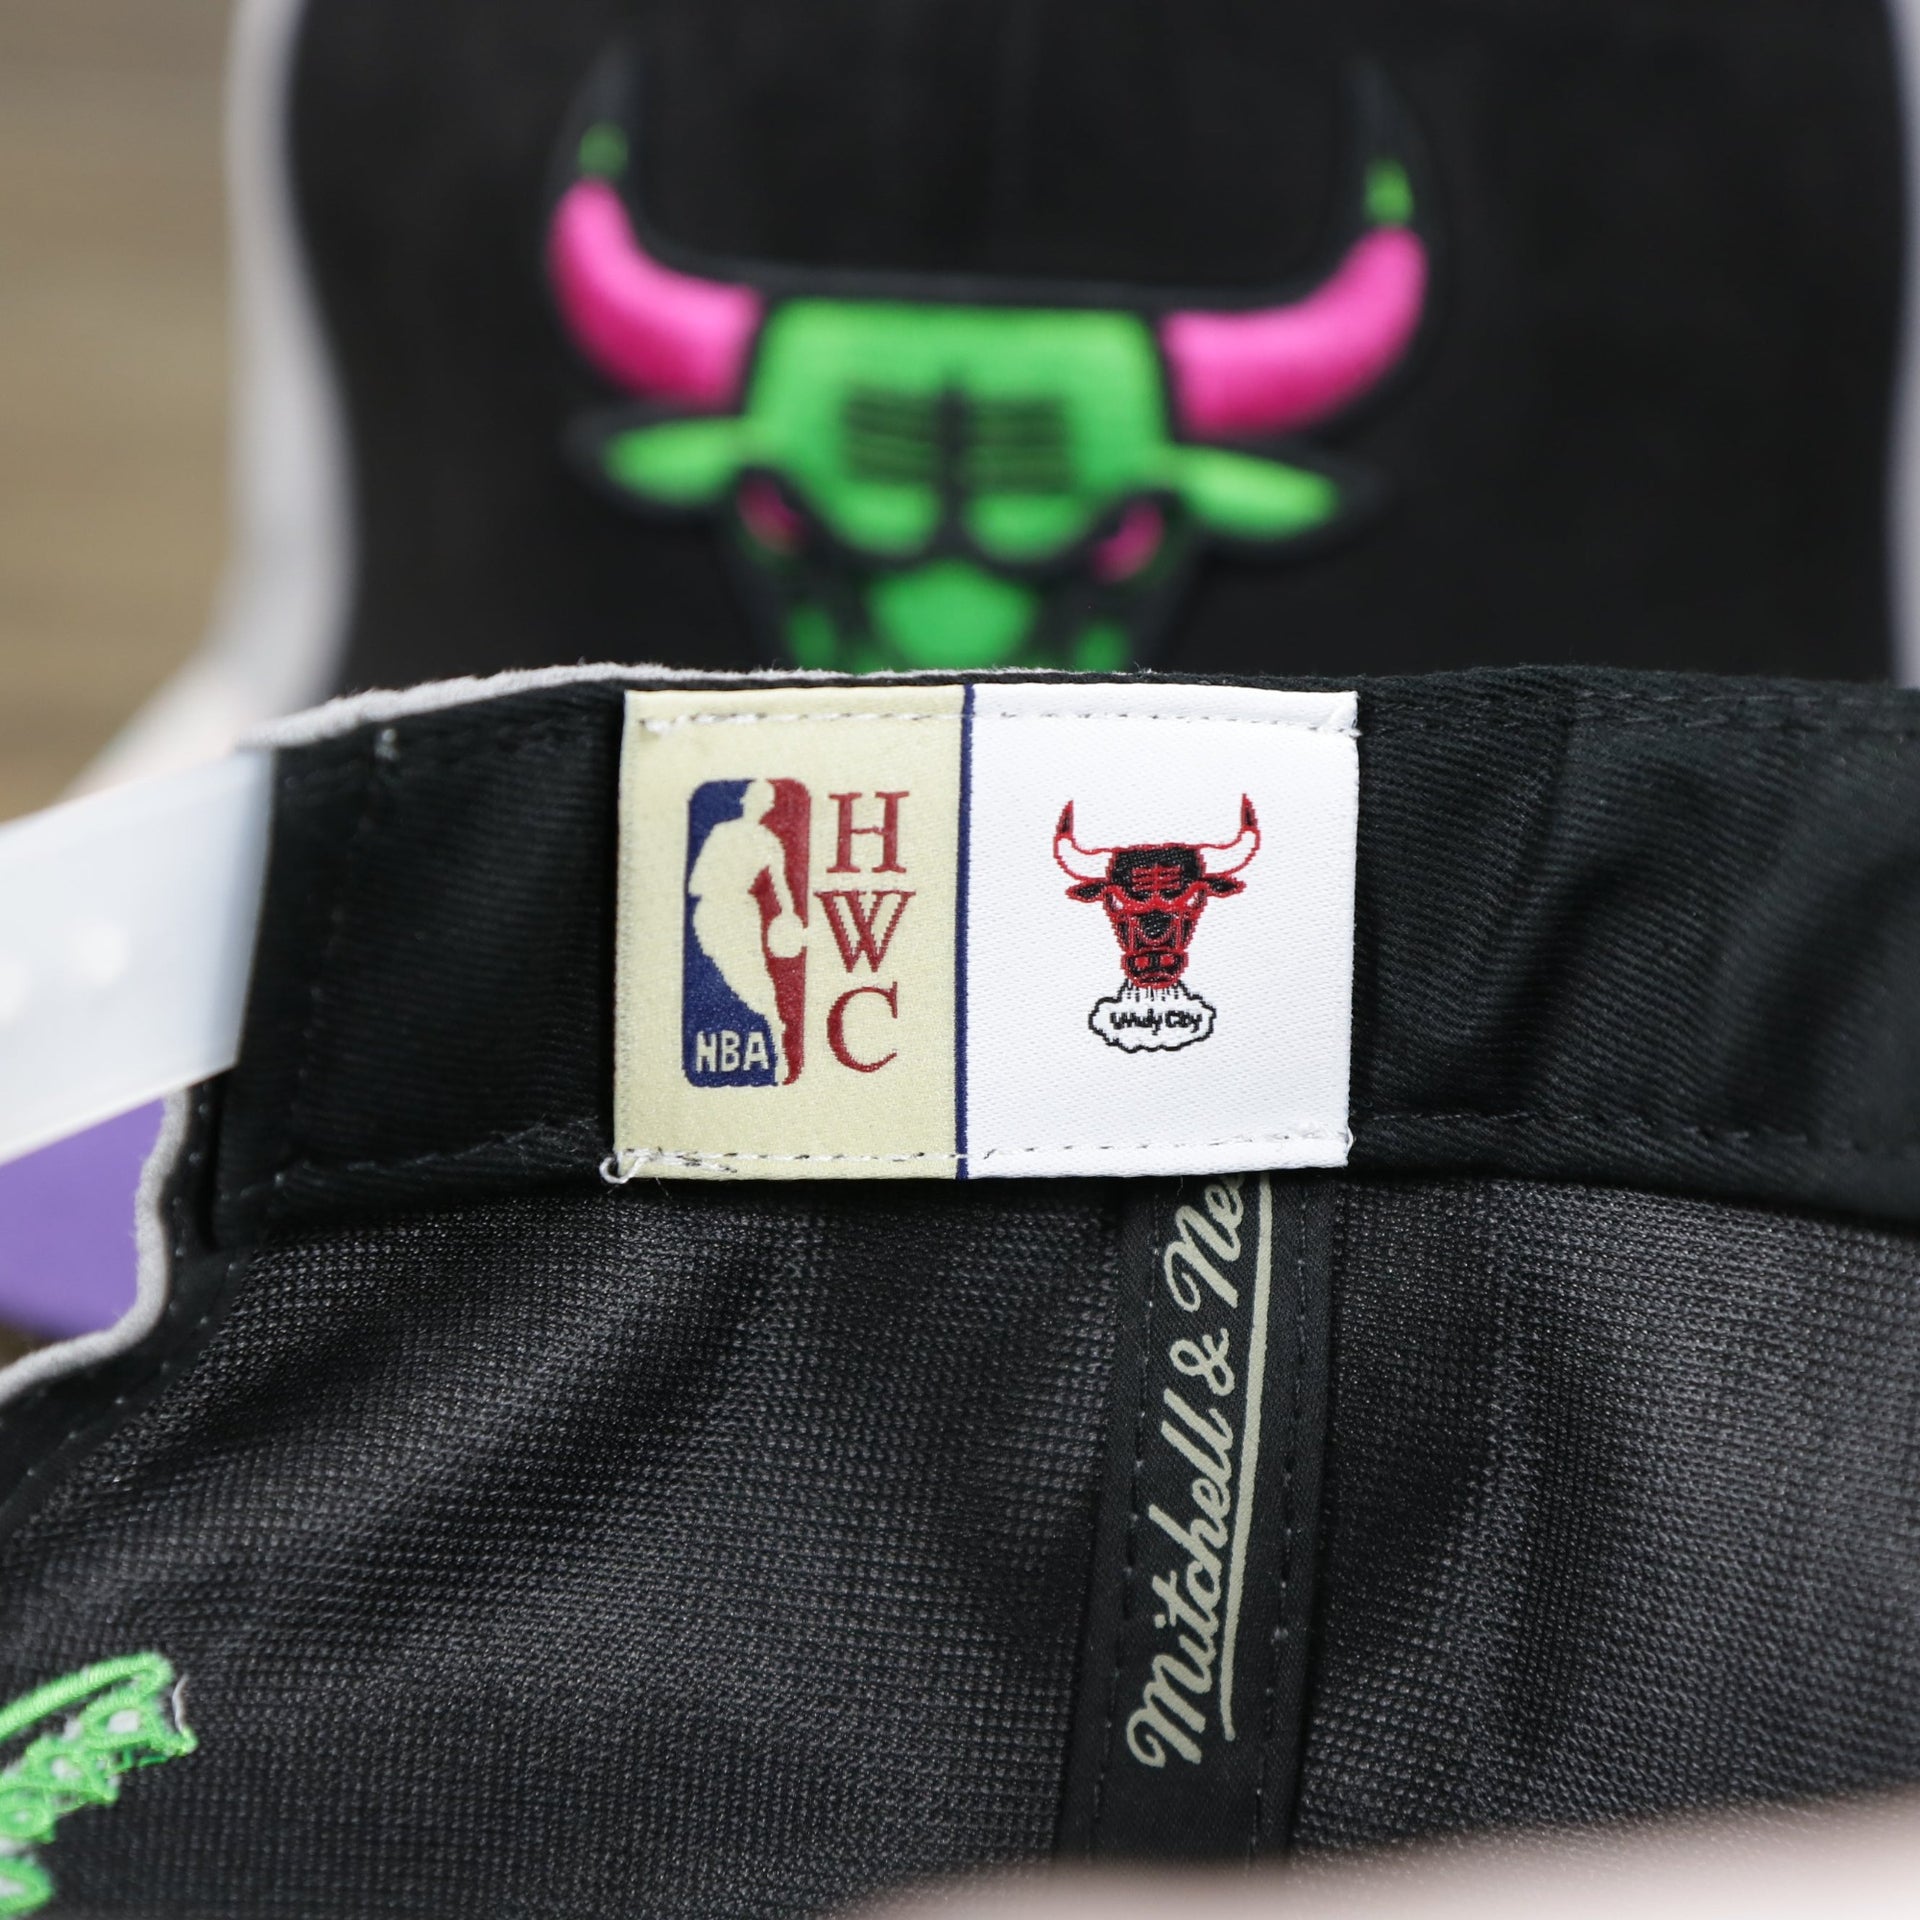 Hardwood Classic label on the Chicago Bulls “NBA Day 5” Bel Air 5s Matching Snapback Hat | Snapback to match Bel Air 5s